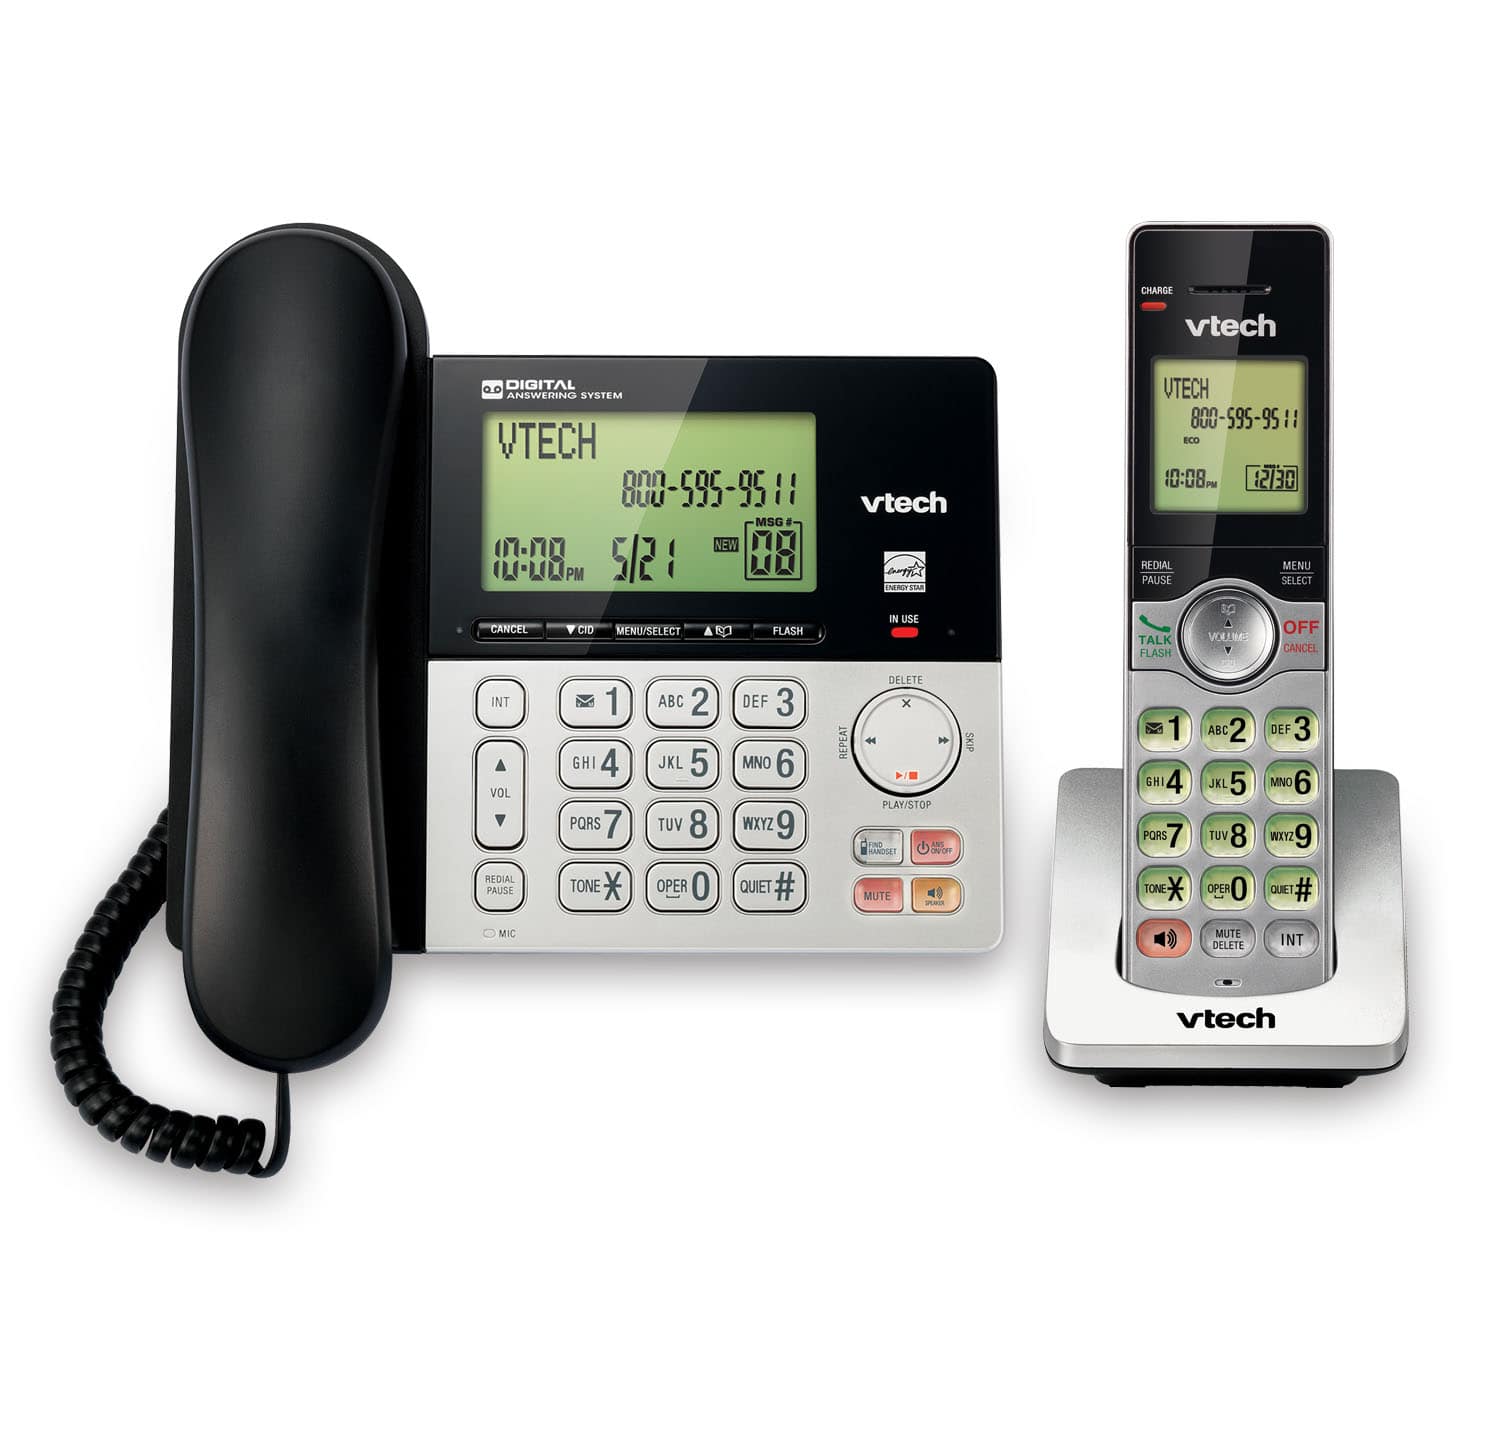 Corded/Cordless Answering System with Caller ID/Call Waiting